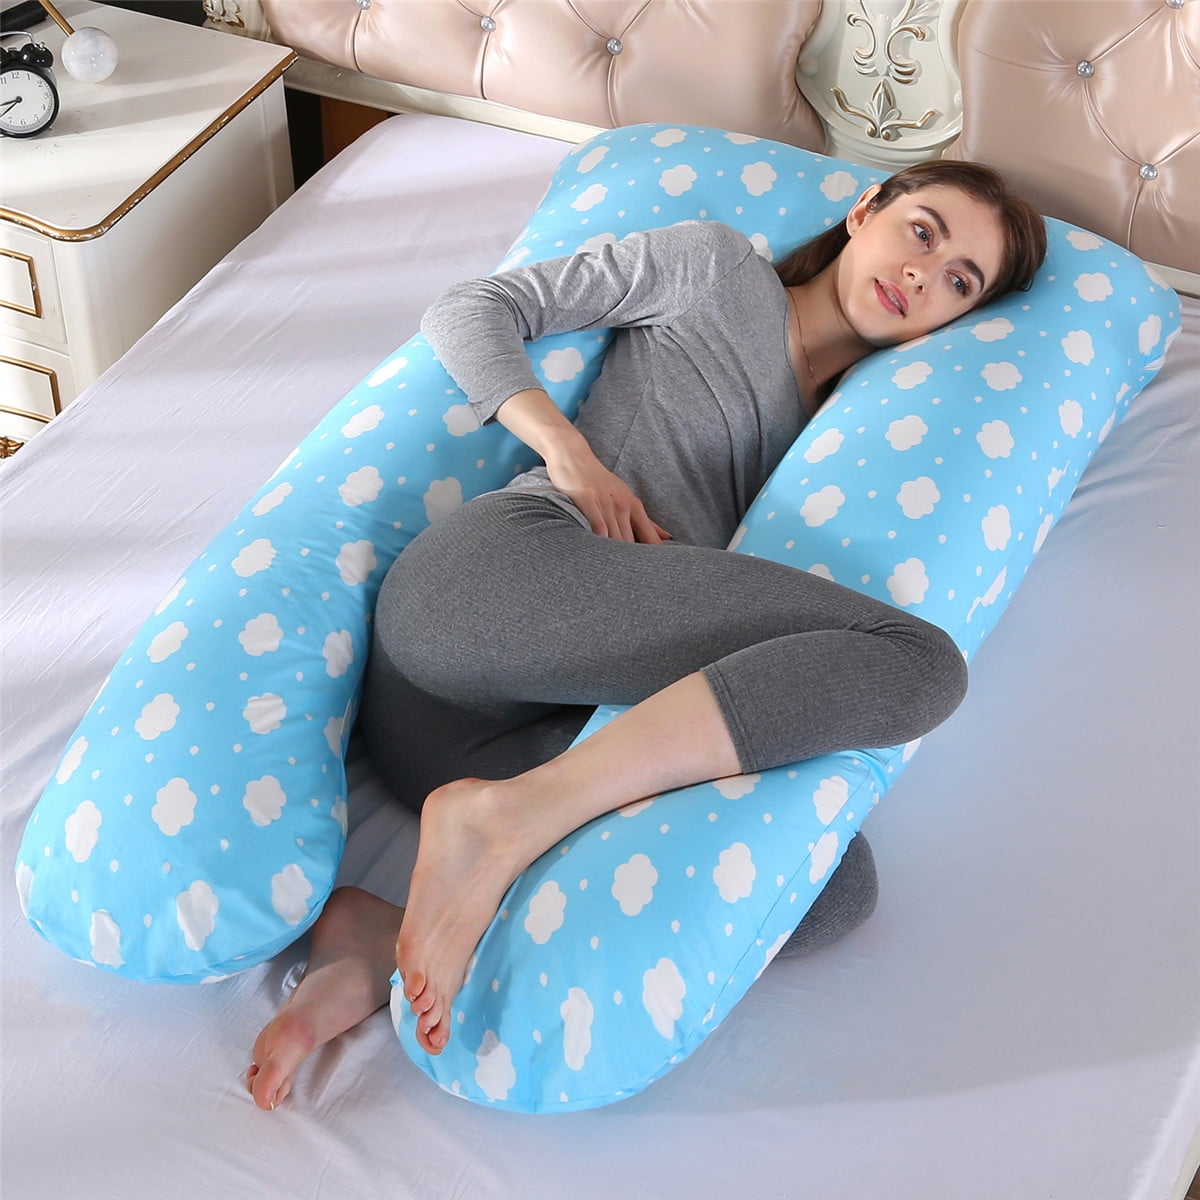 Pack of 2 Maternity Pregnancy Pillowcase Body Back Support Sanitary Case 